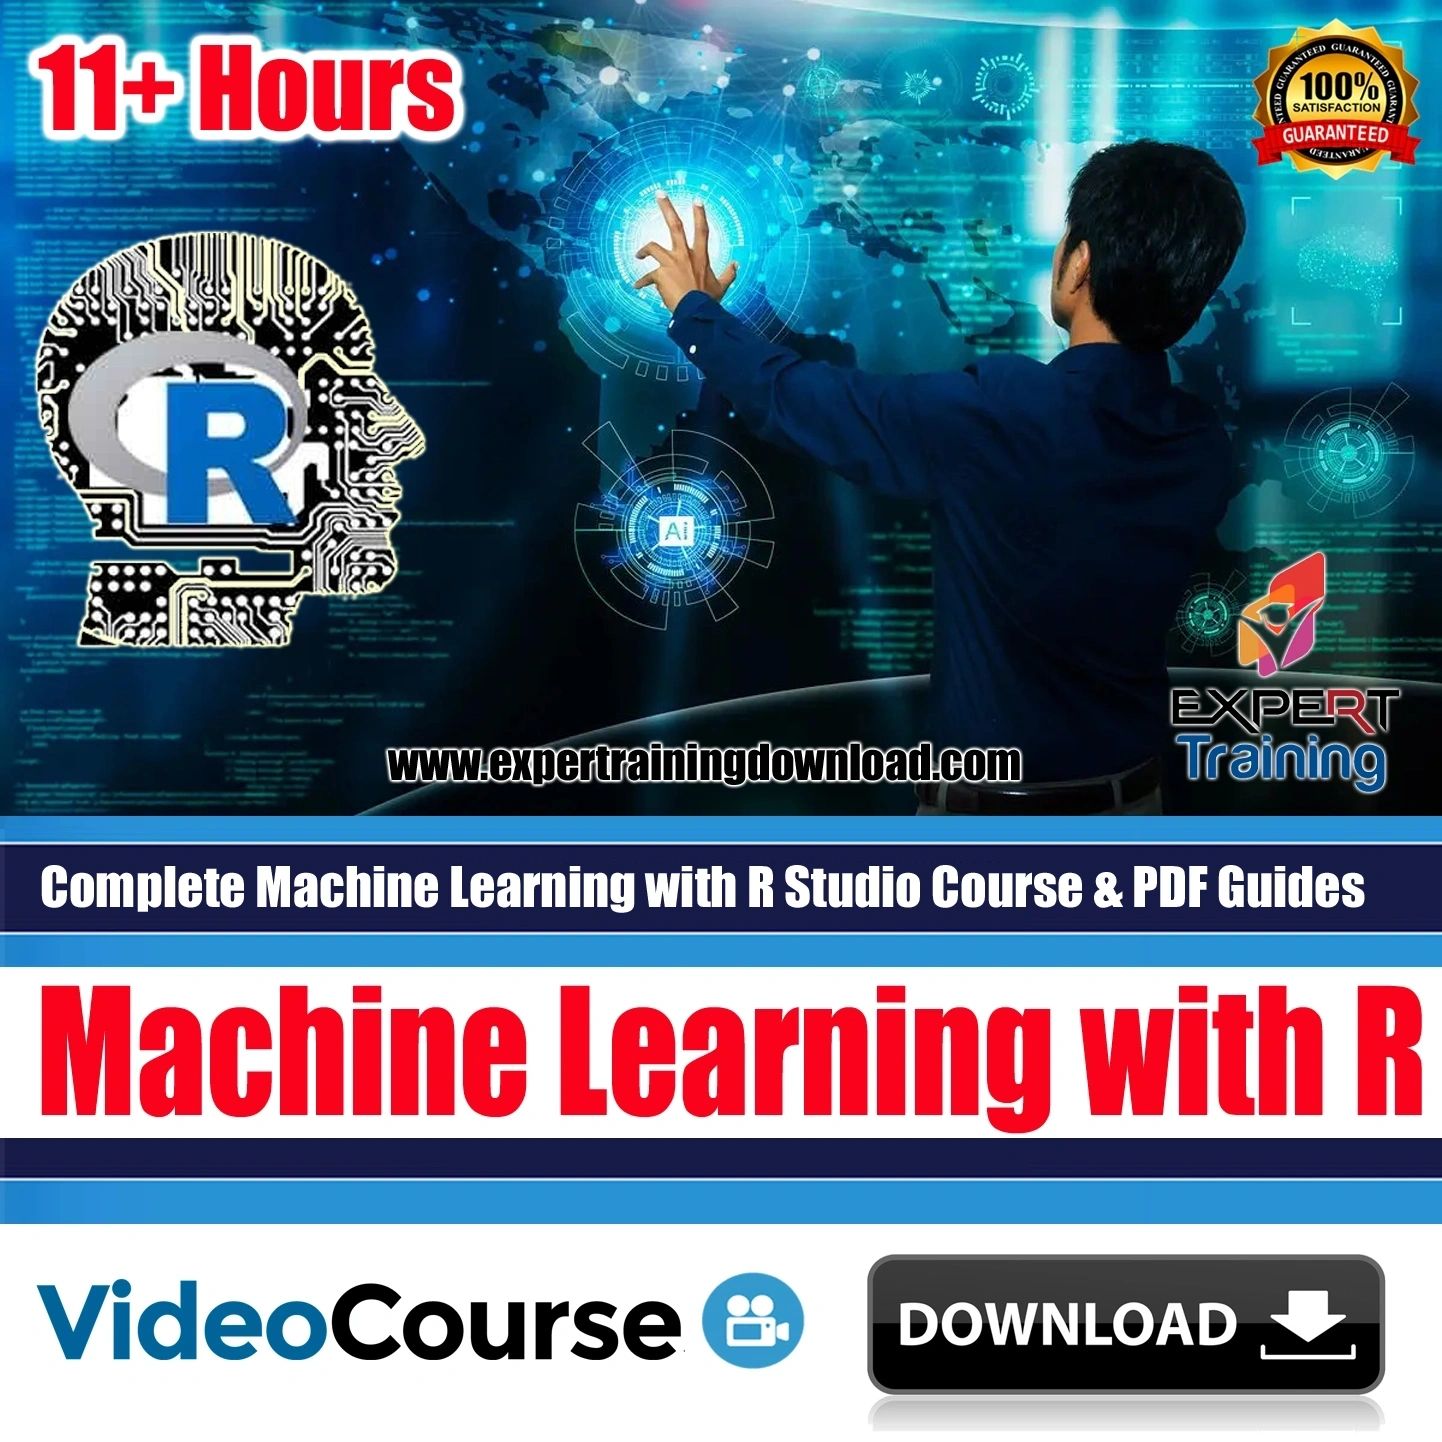 Complete Machine Learning with R Studio Course & PDF Guides